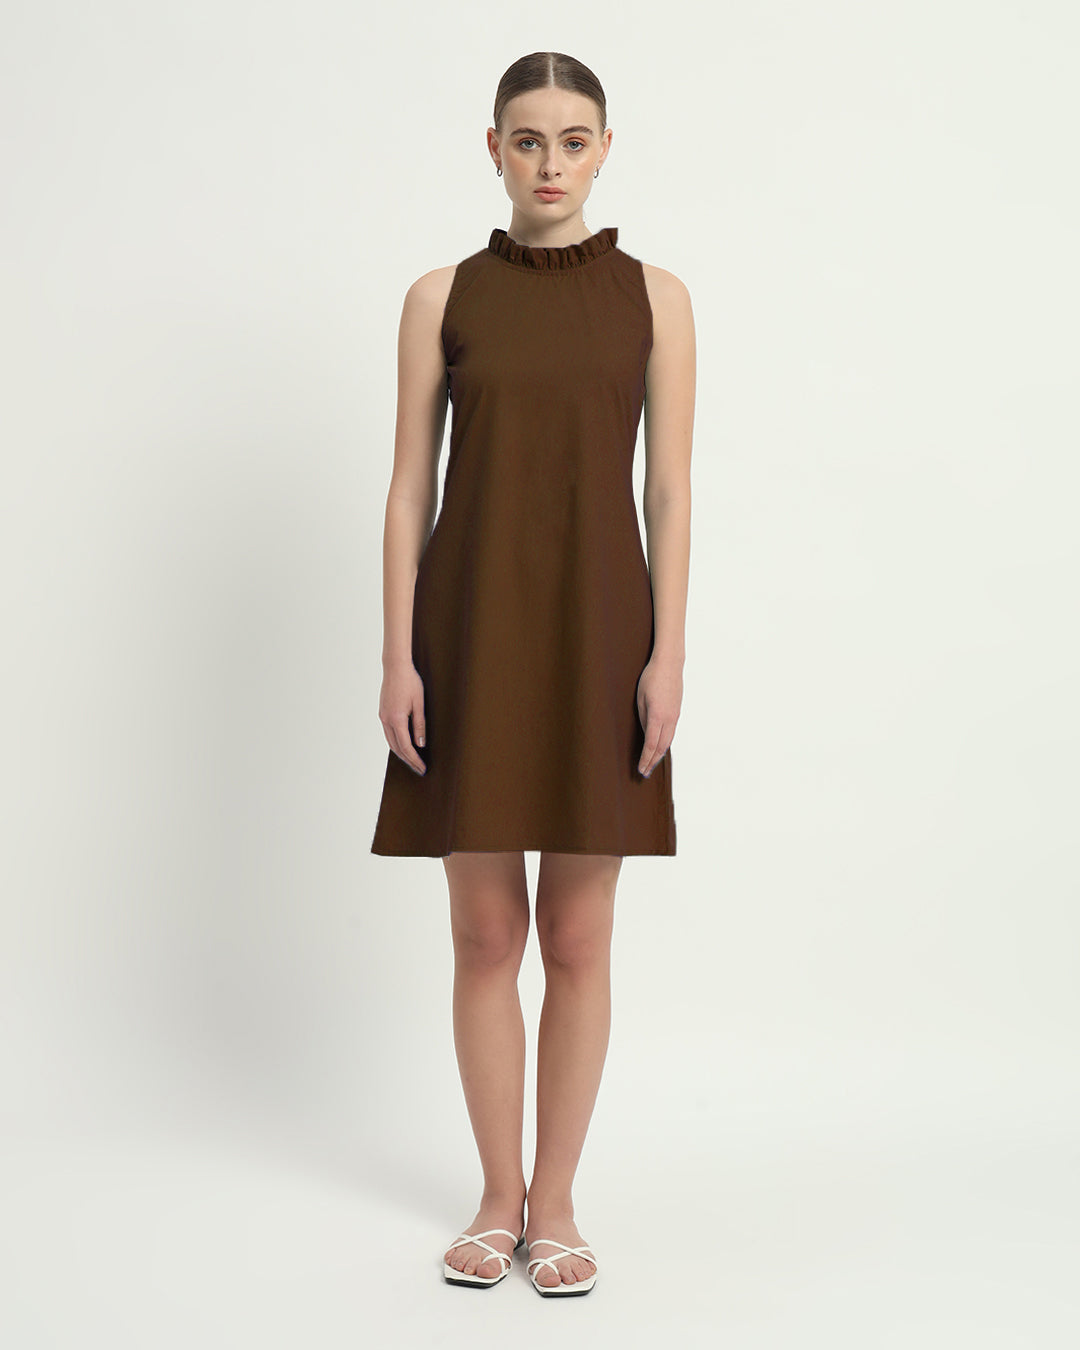 The Nutshell Angelica Cotton Dress